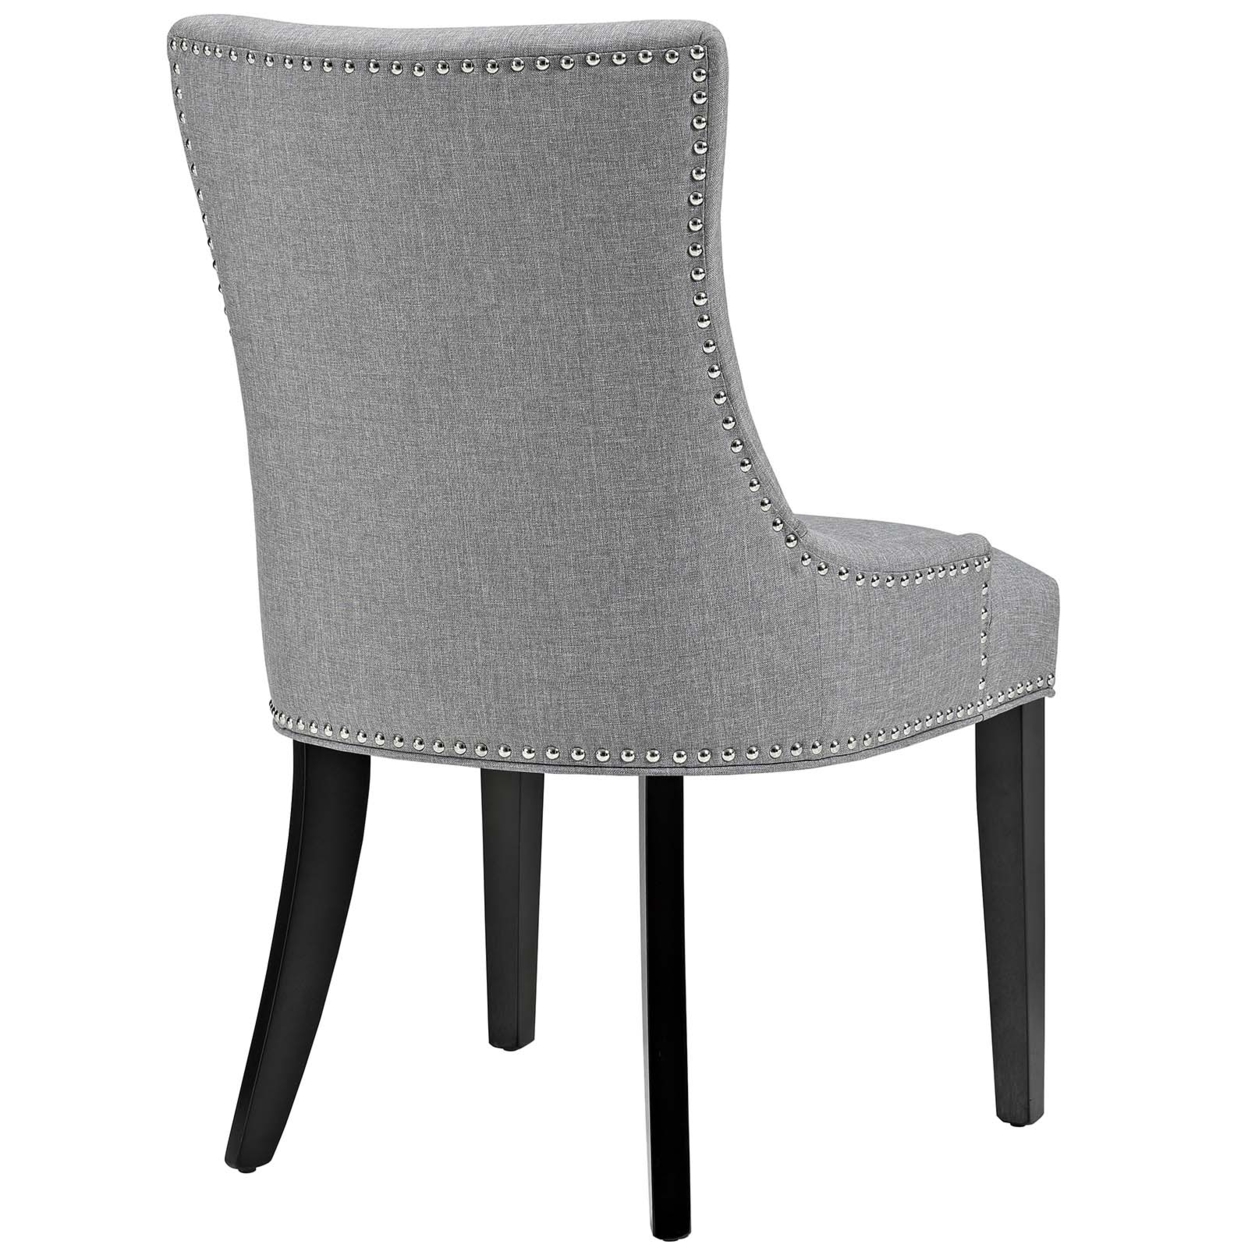 Marquis Fabric Dining Chair, Light Gray